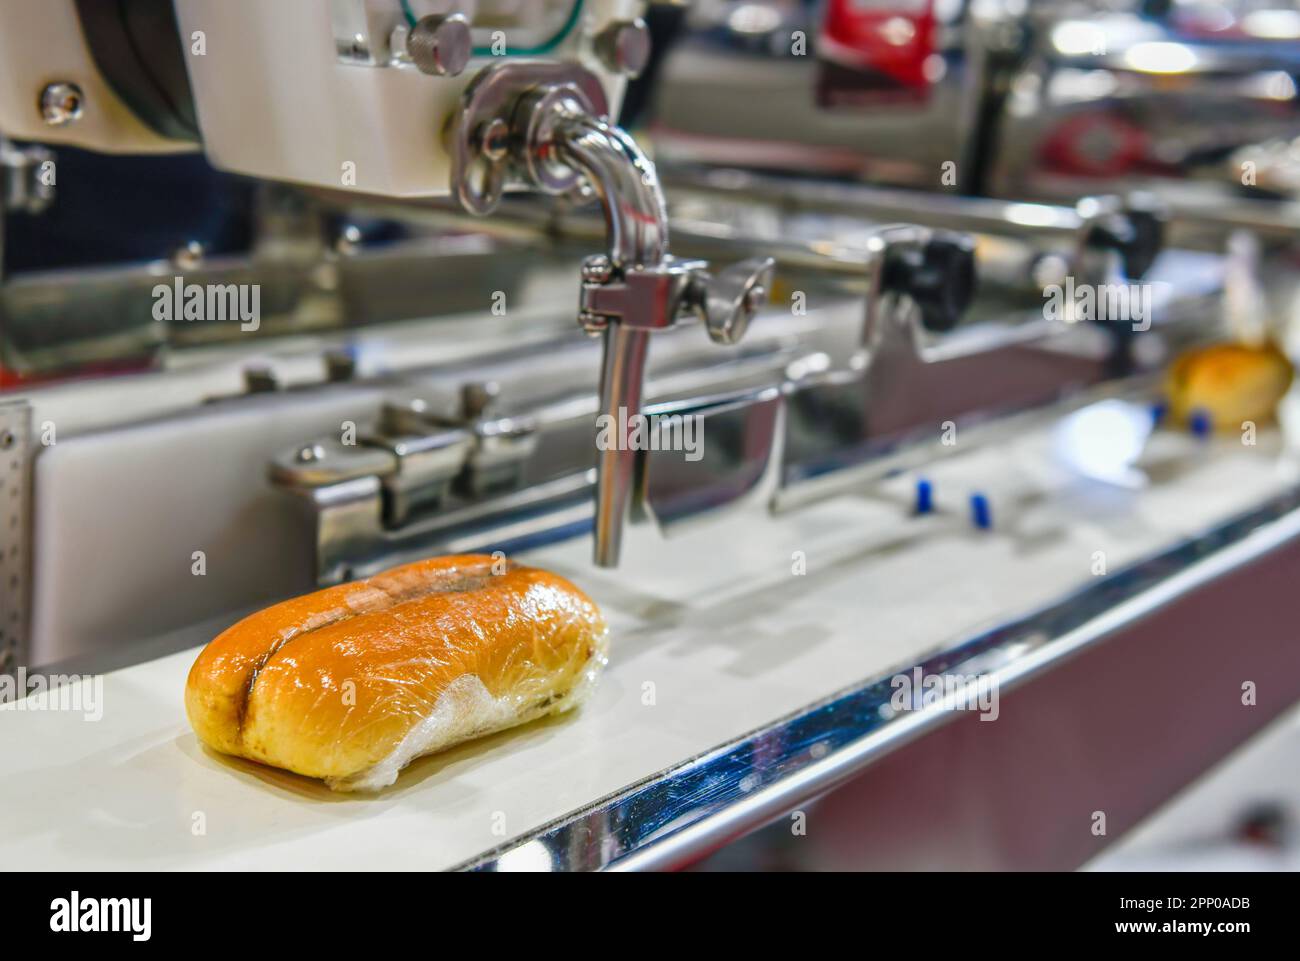 Automatic hamburger buns production line on conveyor belt equipment machinery in factory, industrial food production. Stock Photo